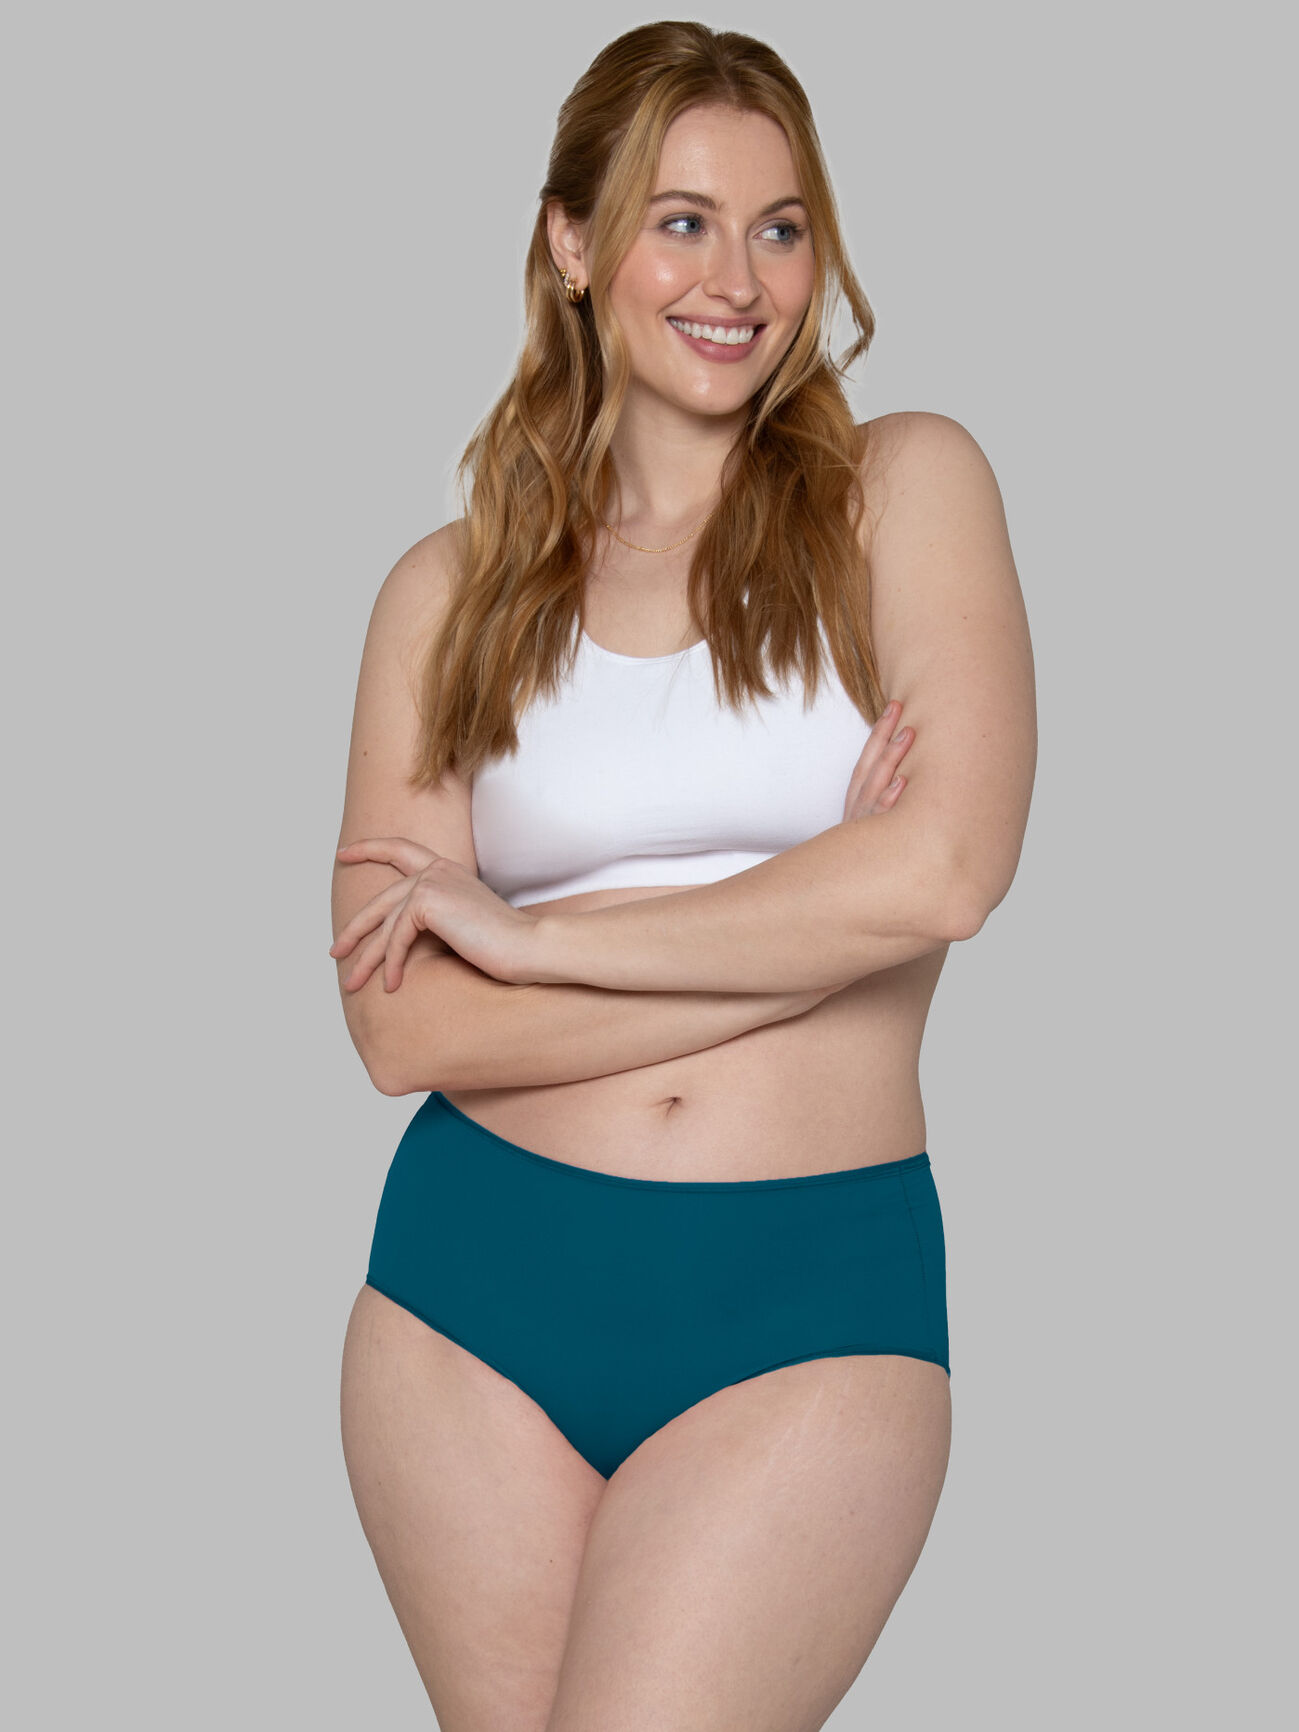 2 or 4-Pack of Women's Lightweight Seamless Knickers - 4 Colours